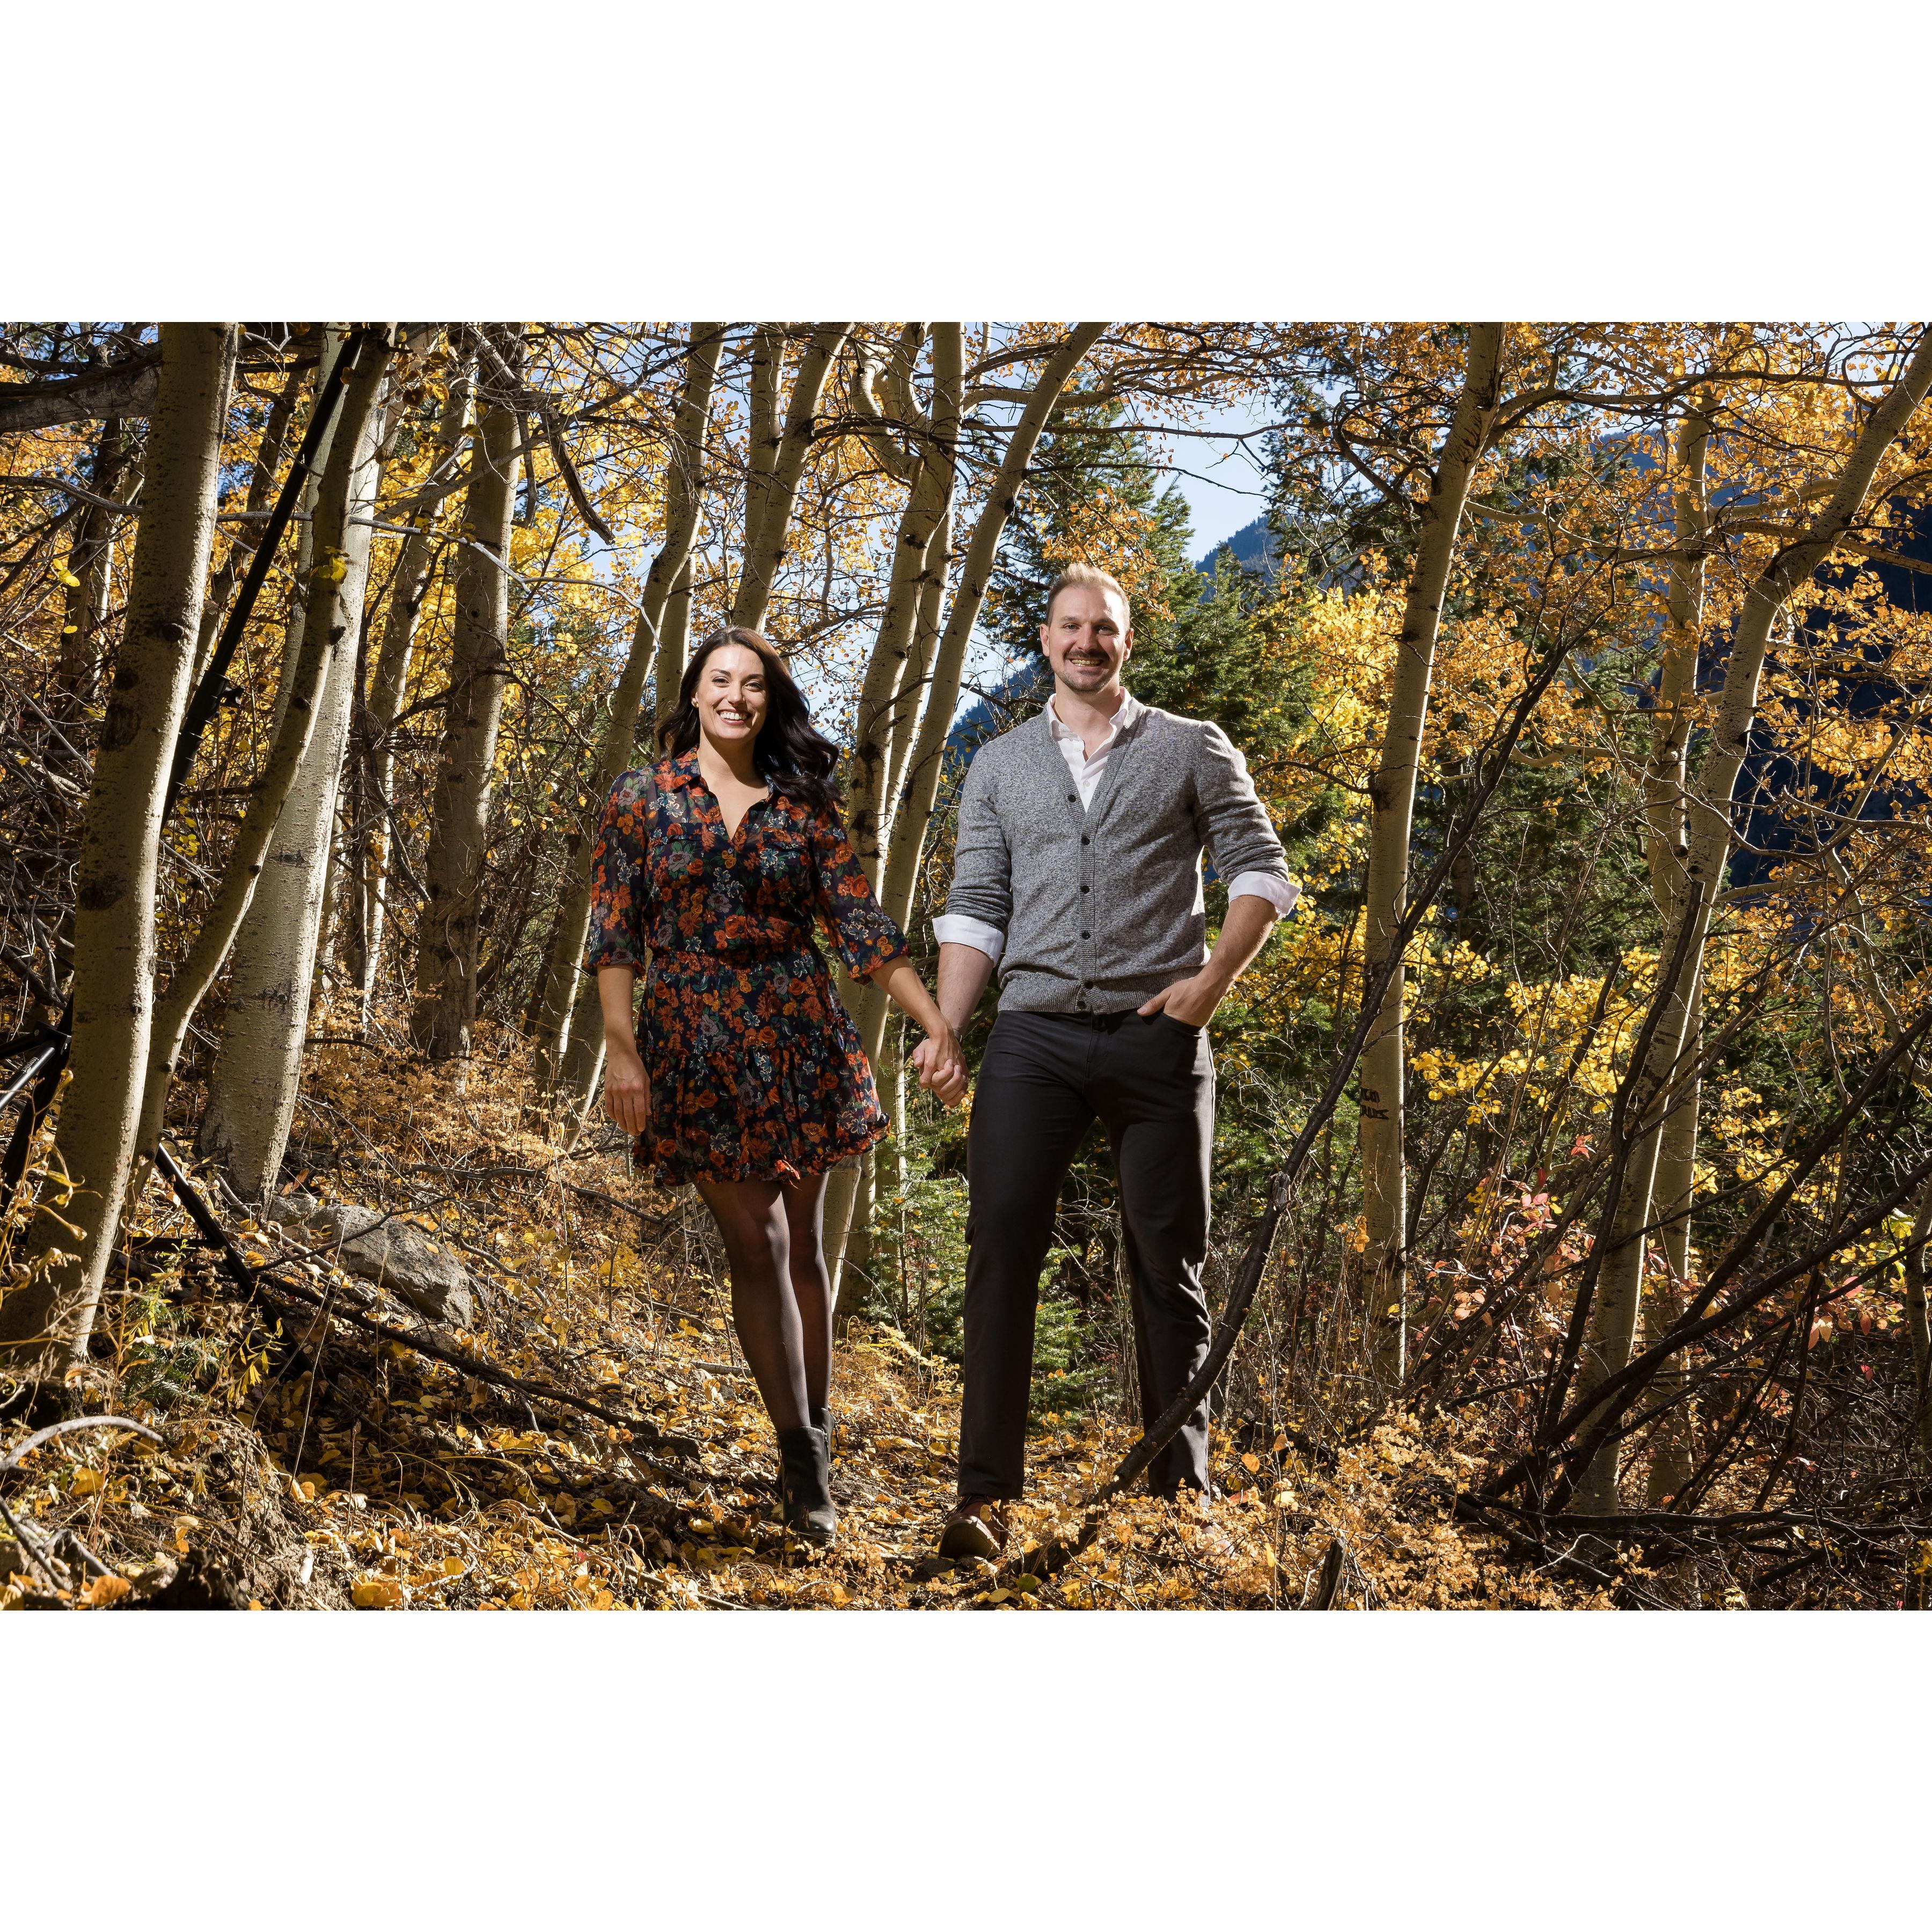 Engagement Photo Session with our Photographer, Joseph Burns in Silverplume, CO!